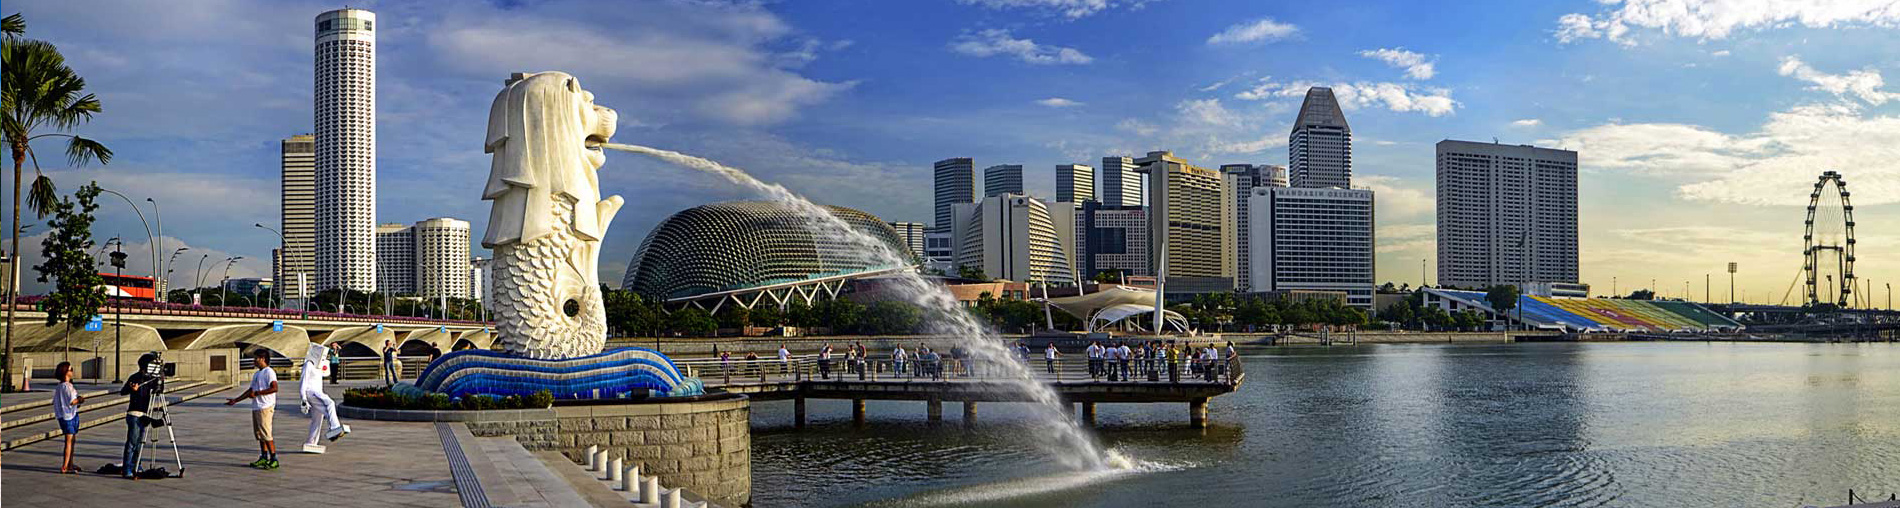 Singapore Holiday Tour Packages From India